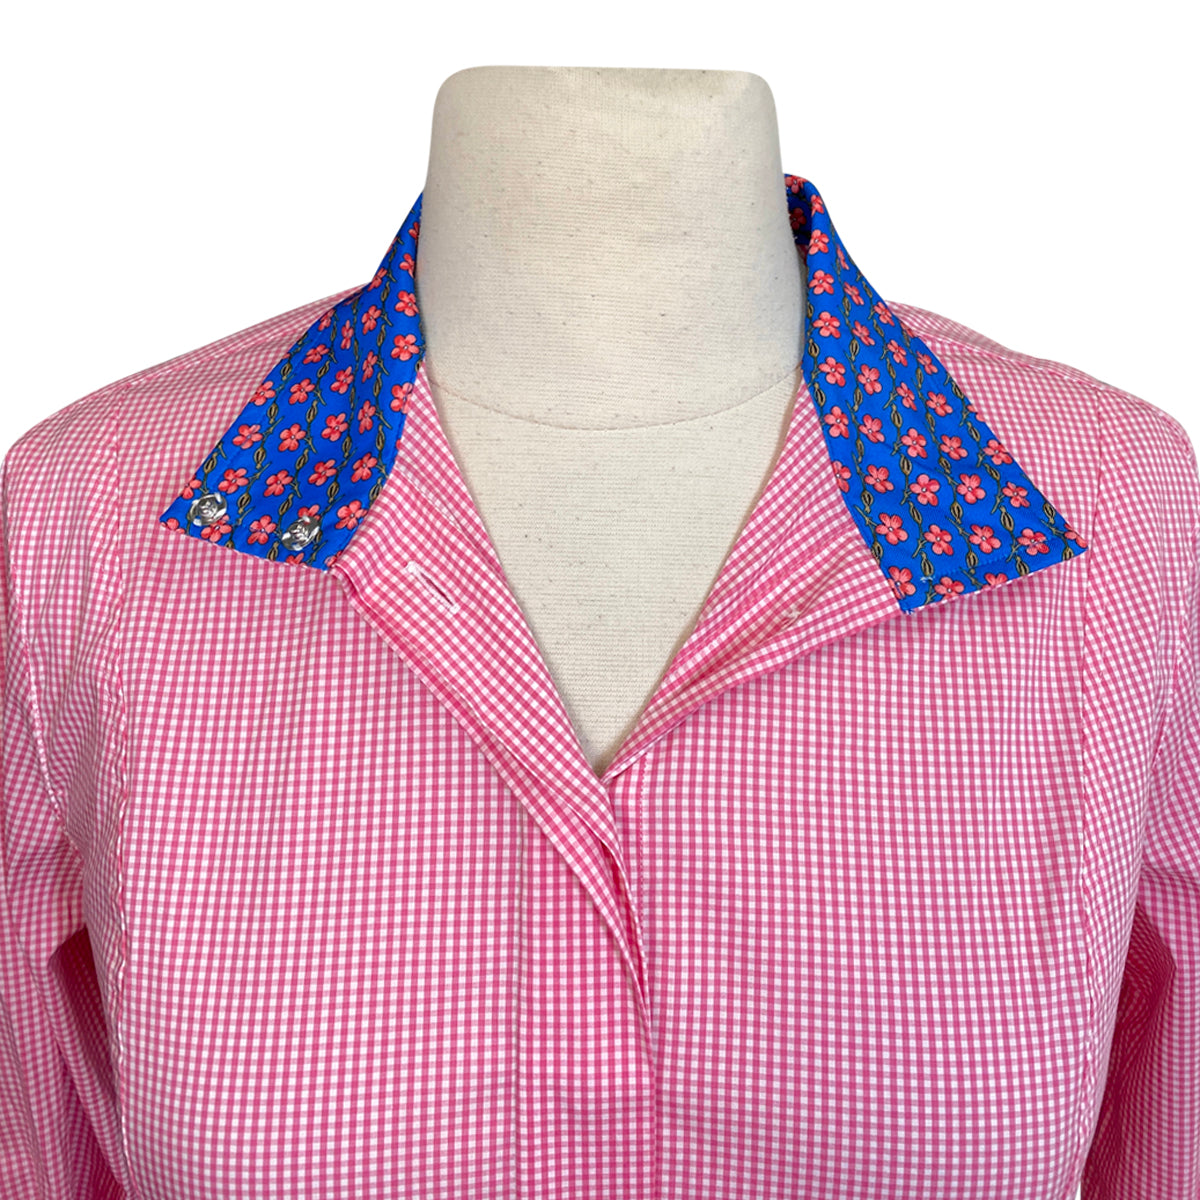 Essex Classics 'Isabel' Fitted Straight Collar Show Shirt in Pink Gingham